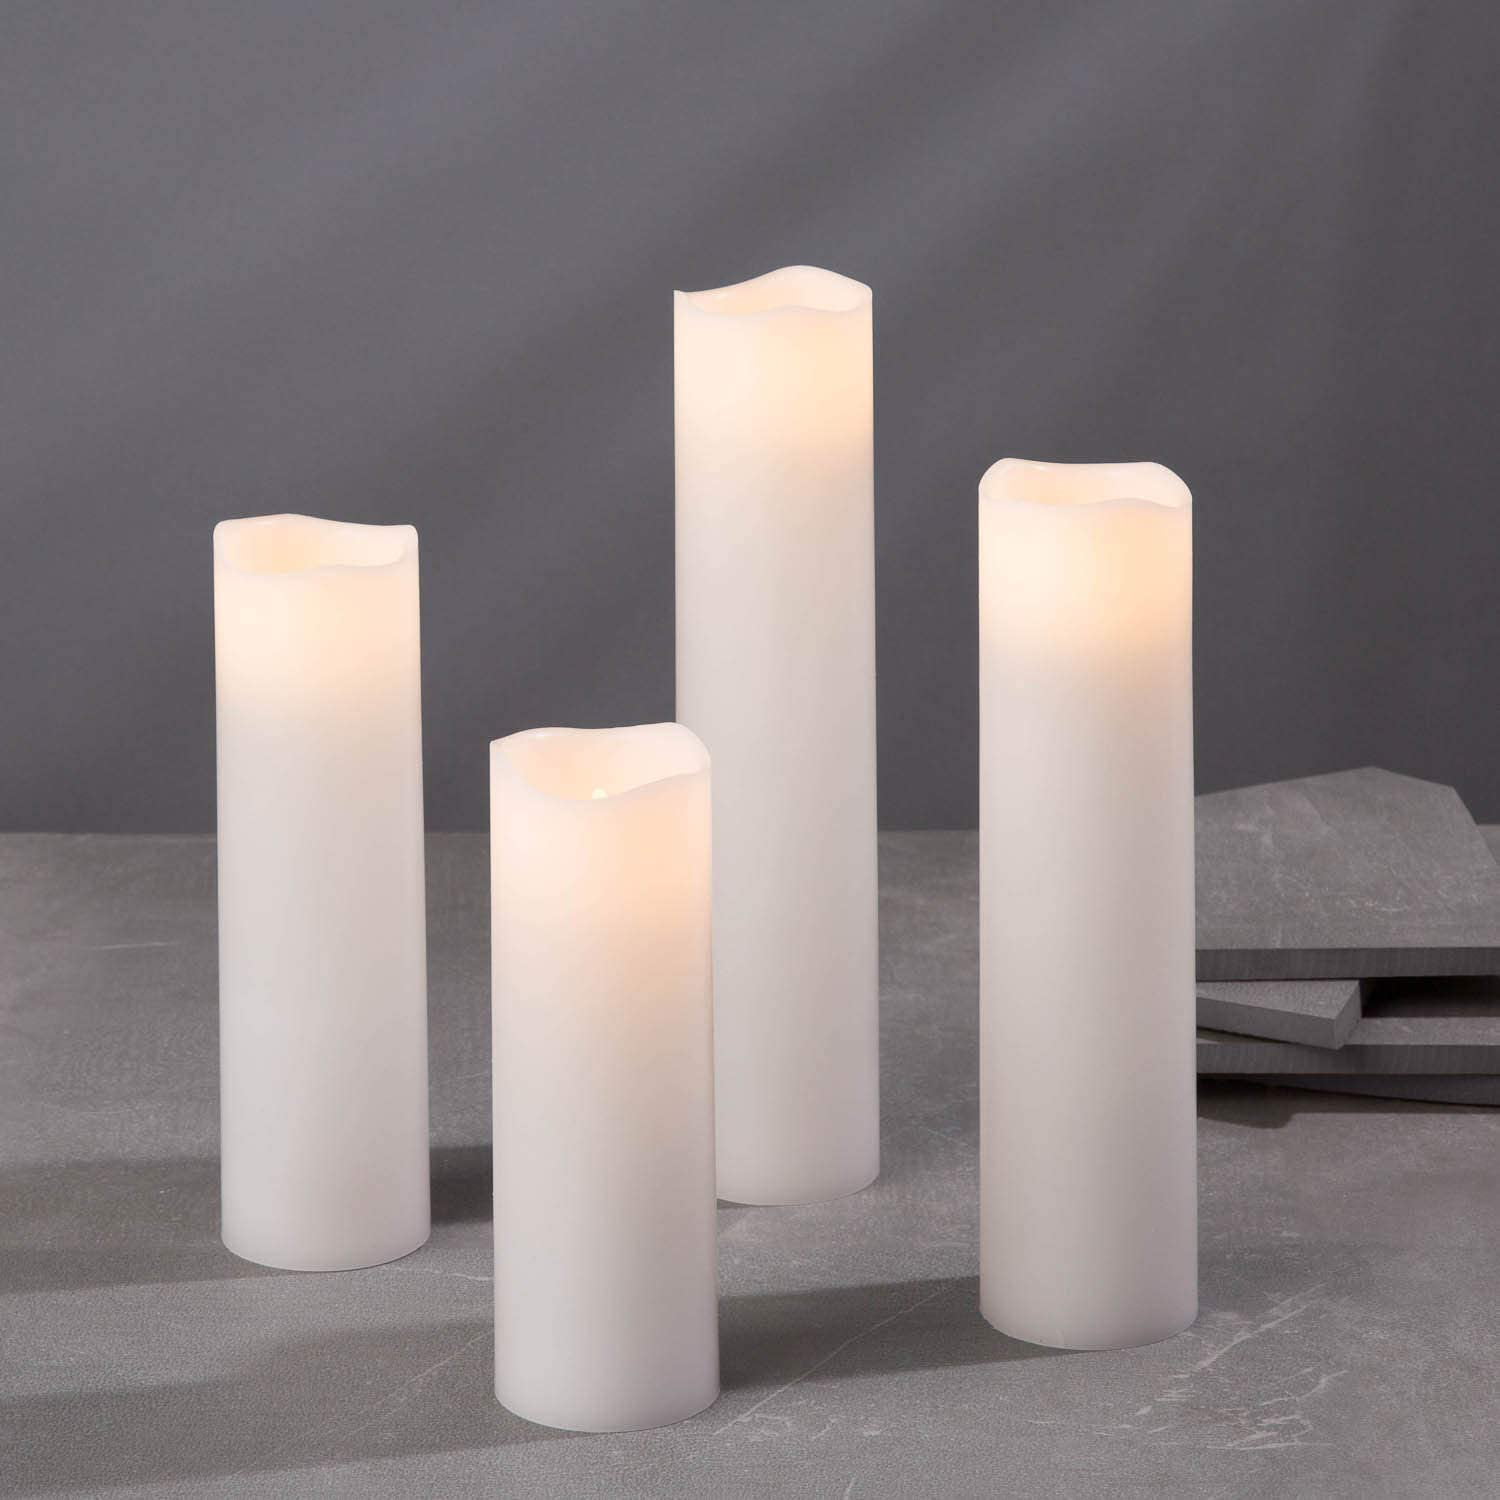 Flameless Candle Set, 2 Inch Diameter - Battery Operated, 4 Pack, Slim